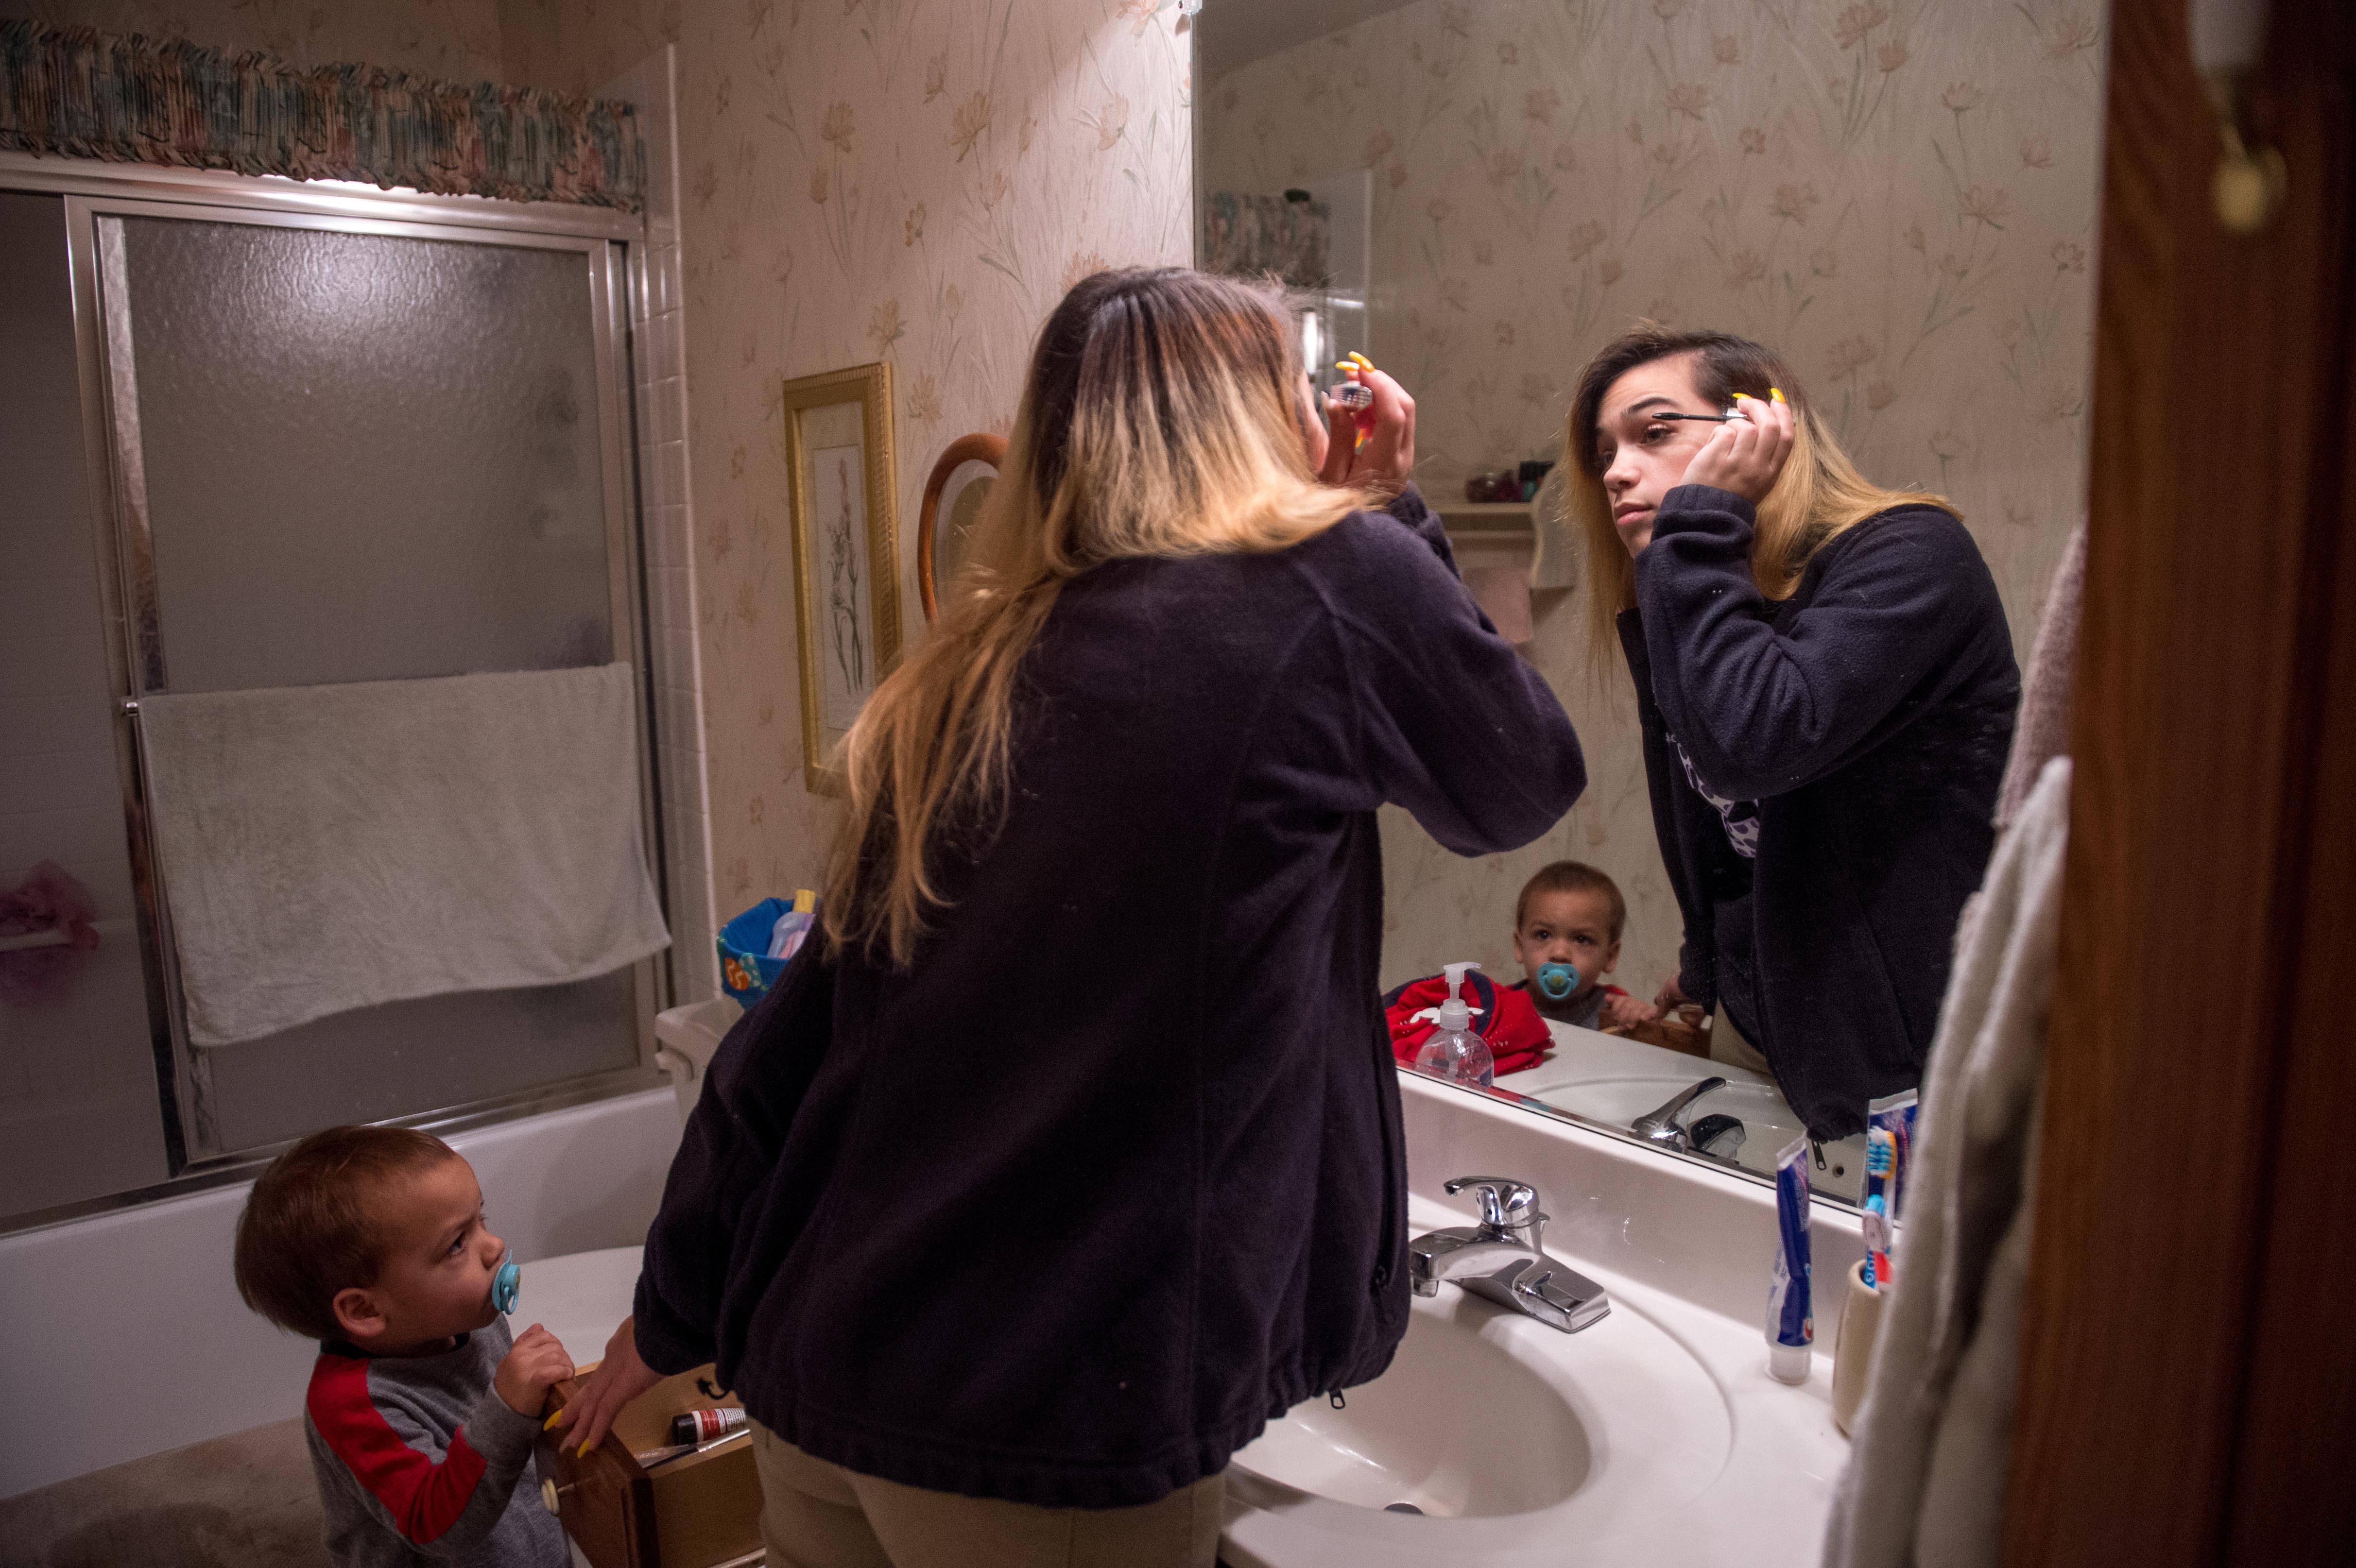 A young mother does her makeup in the bathroom as her child stands near by.